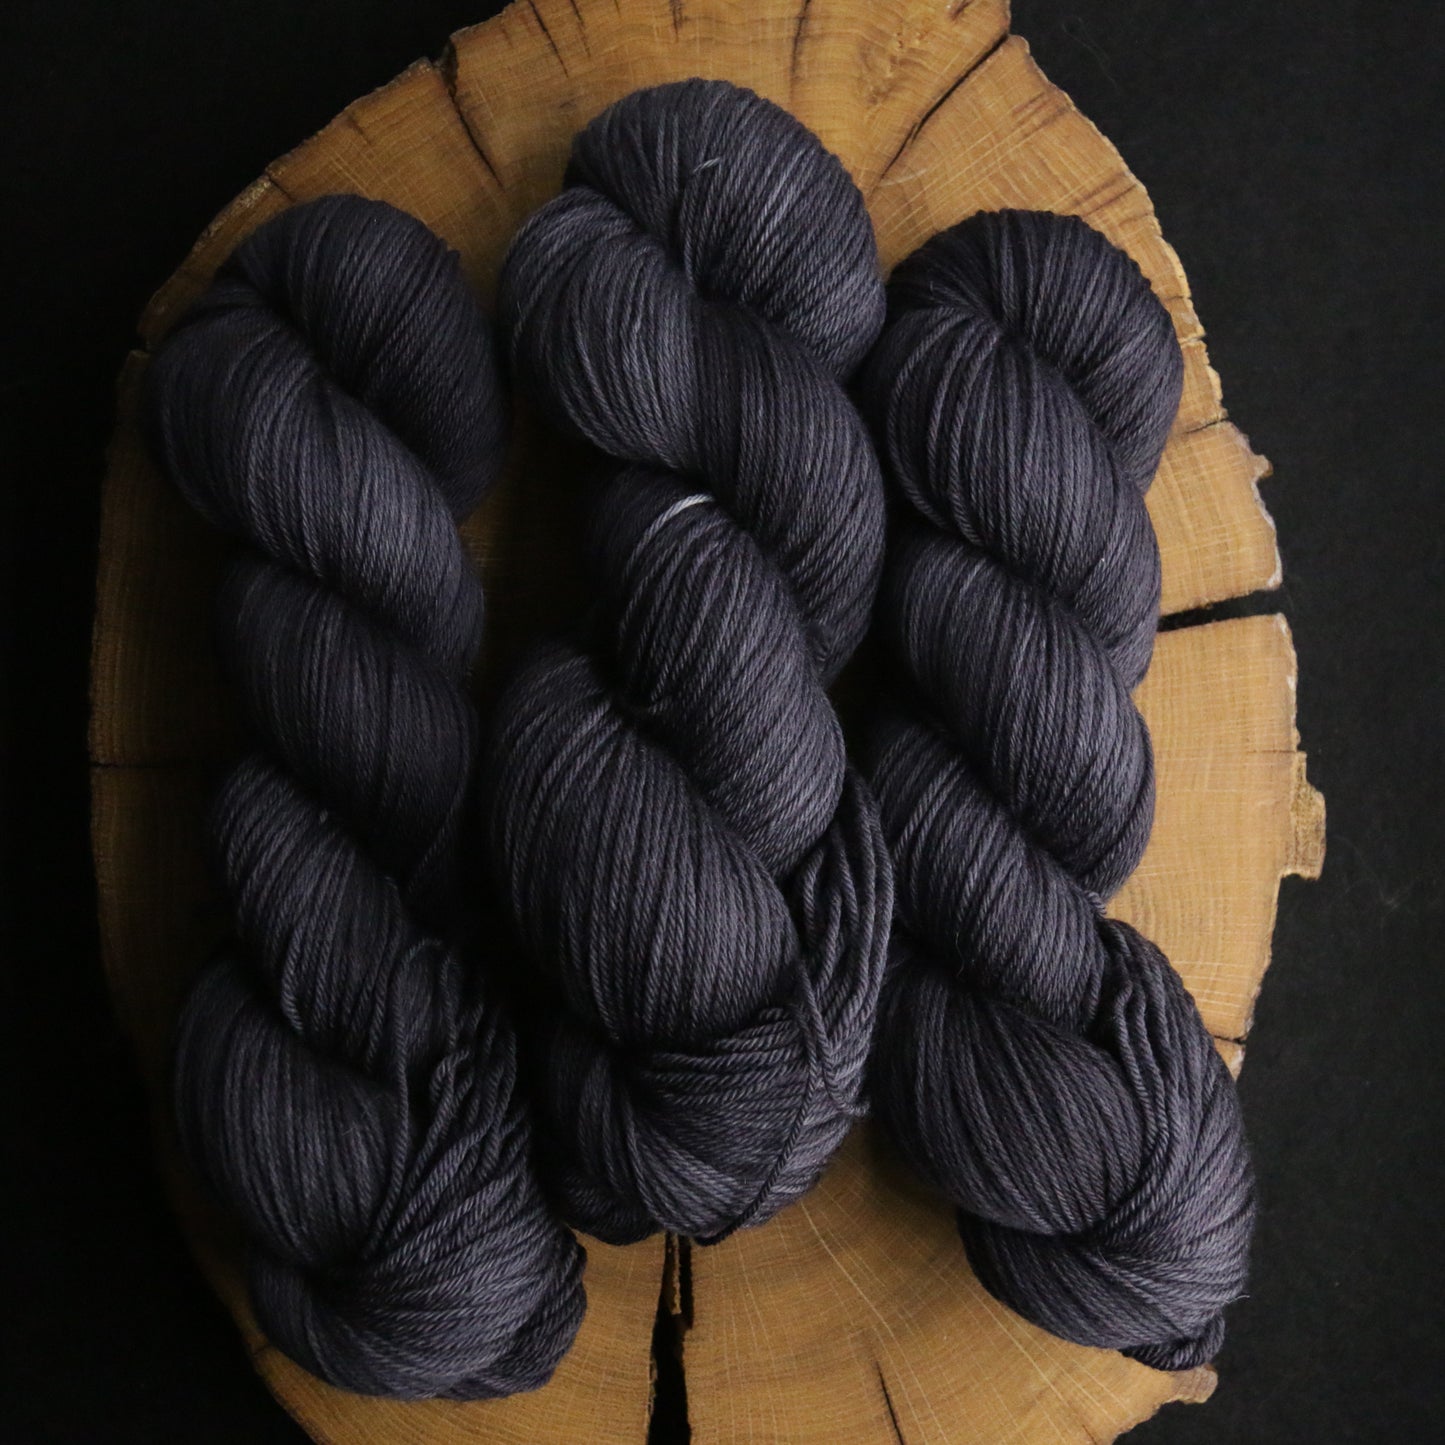 Just a Black - Sweater Quantity and Dyed to Order